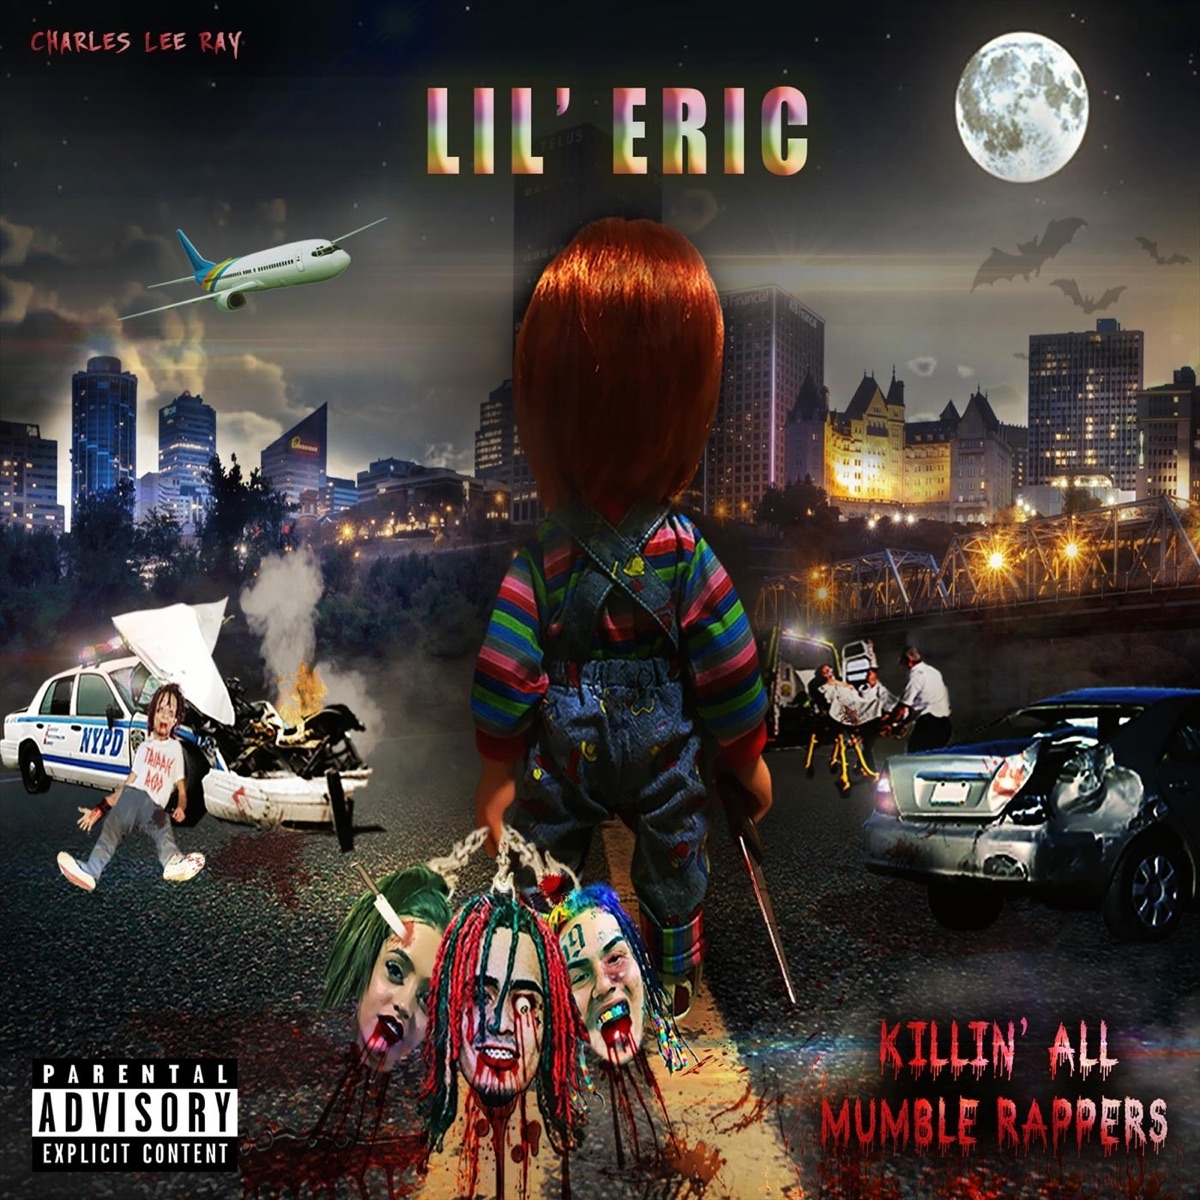 Charles Lee Ray (Da Homie) - Single by Lil' Eric on Apple Music